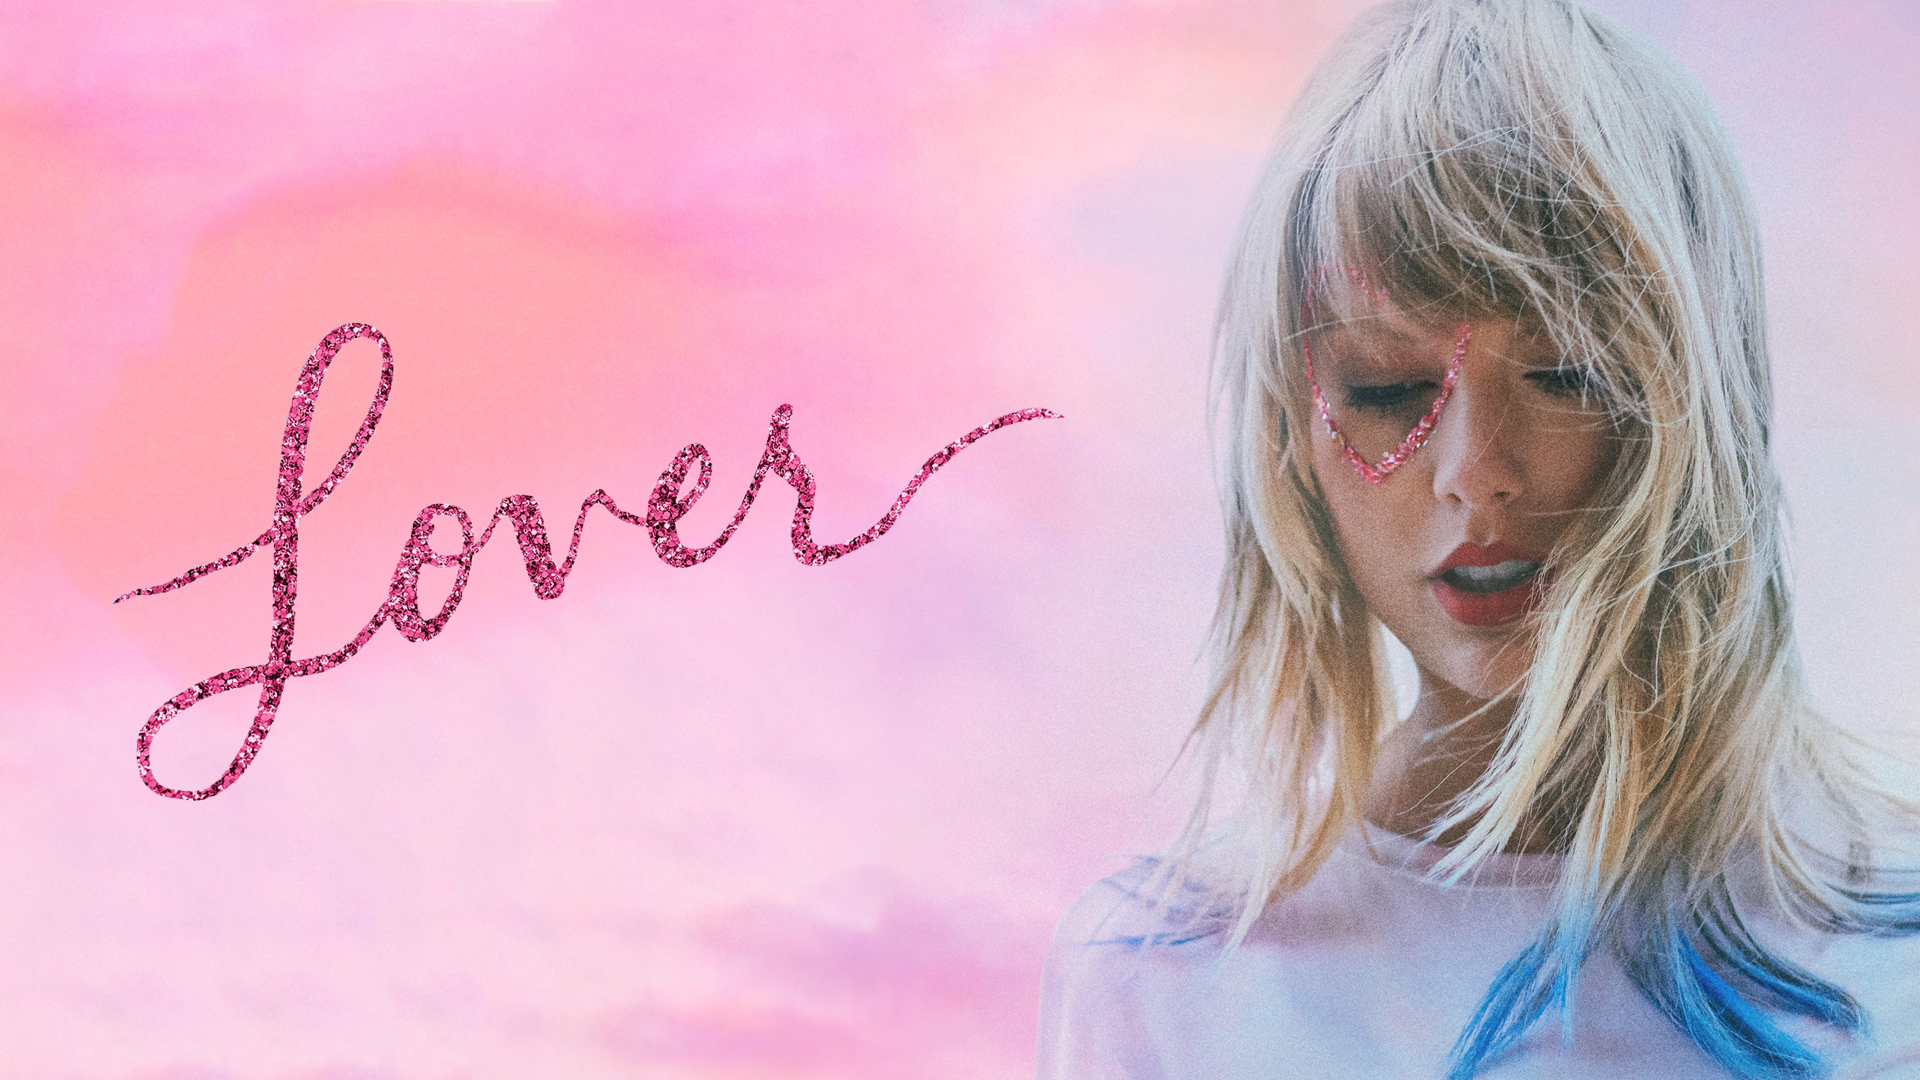 Can't stop listening to YNTCD so I made some Lover wallpaper